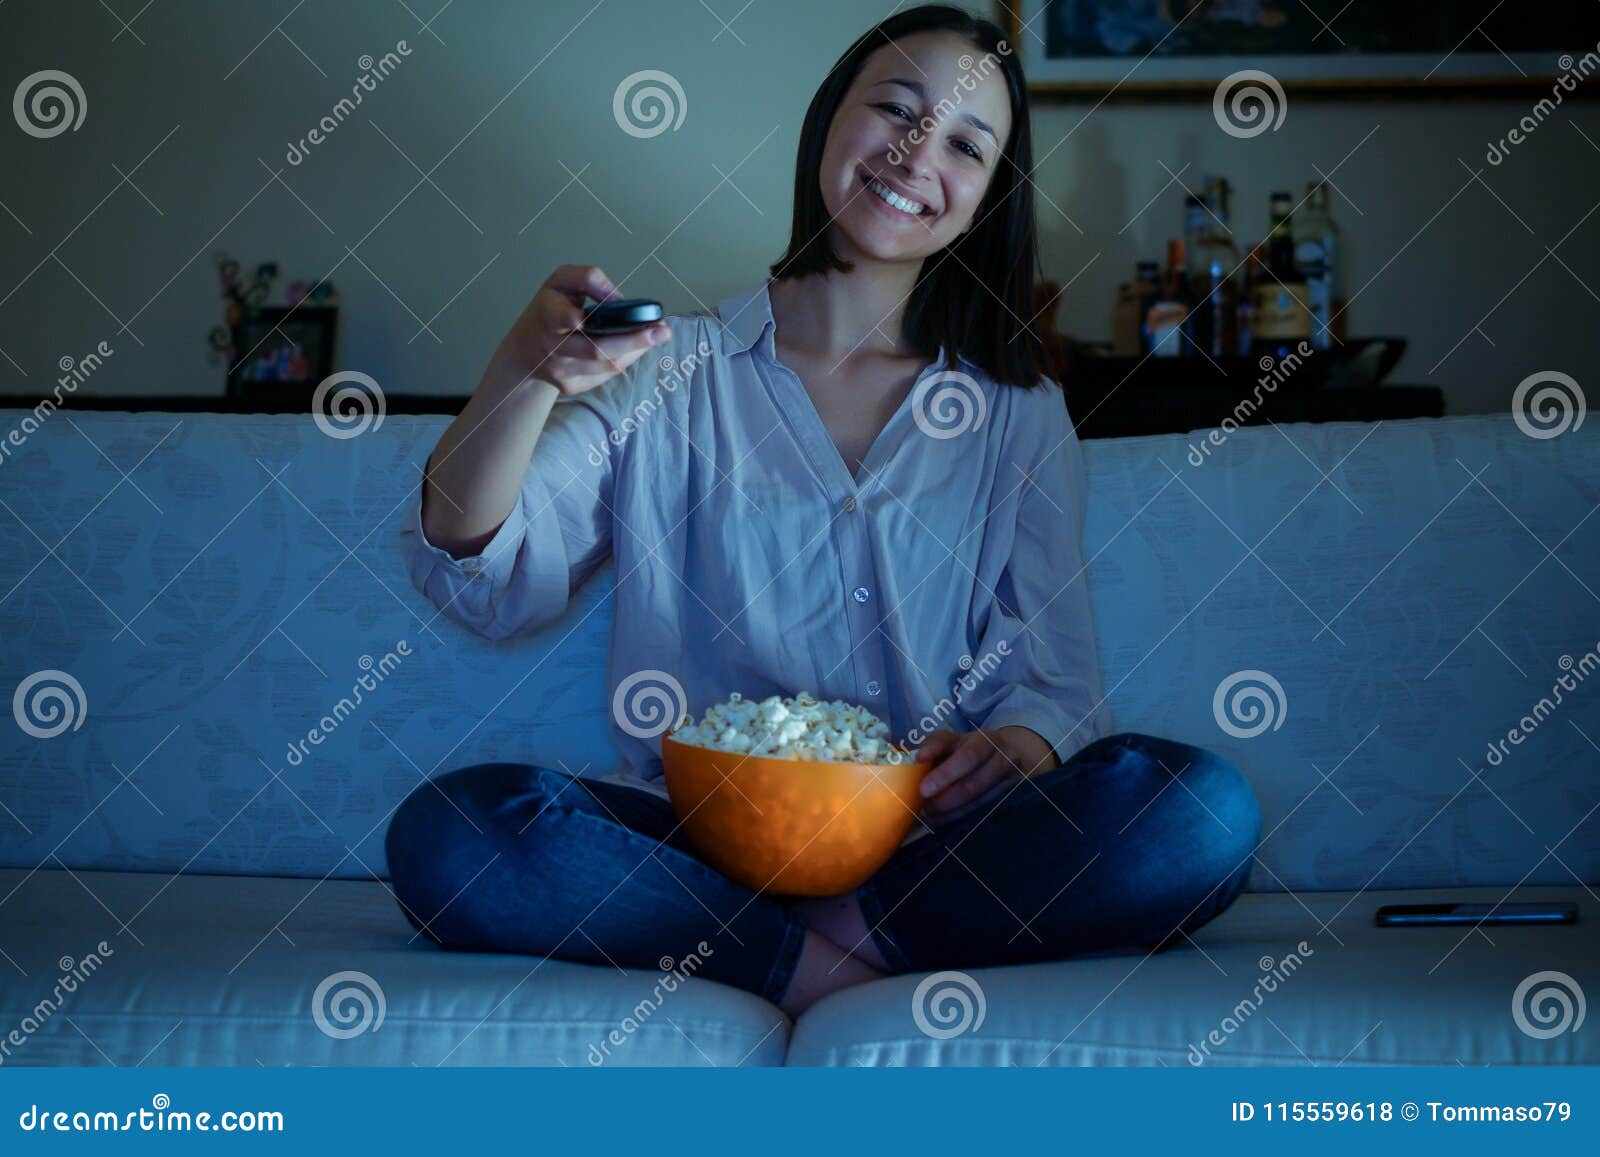 young woman watching her favorite program on tv